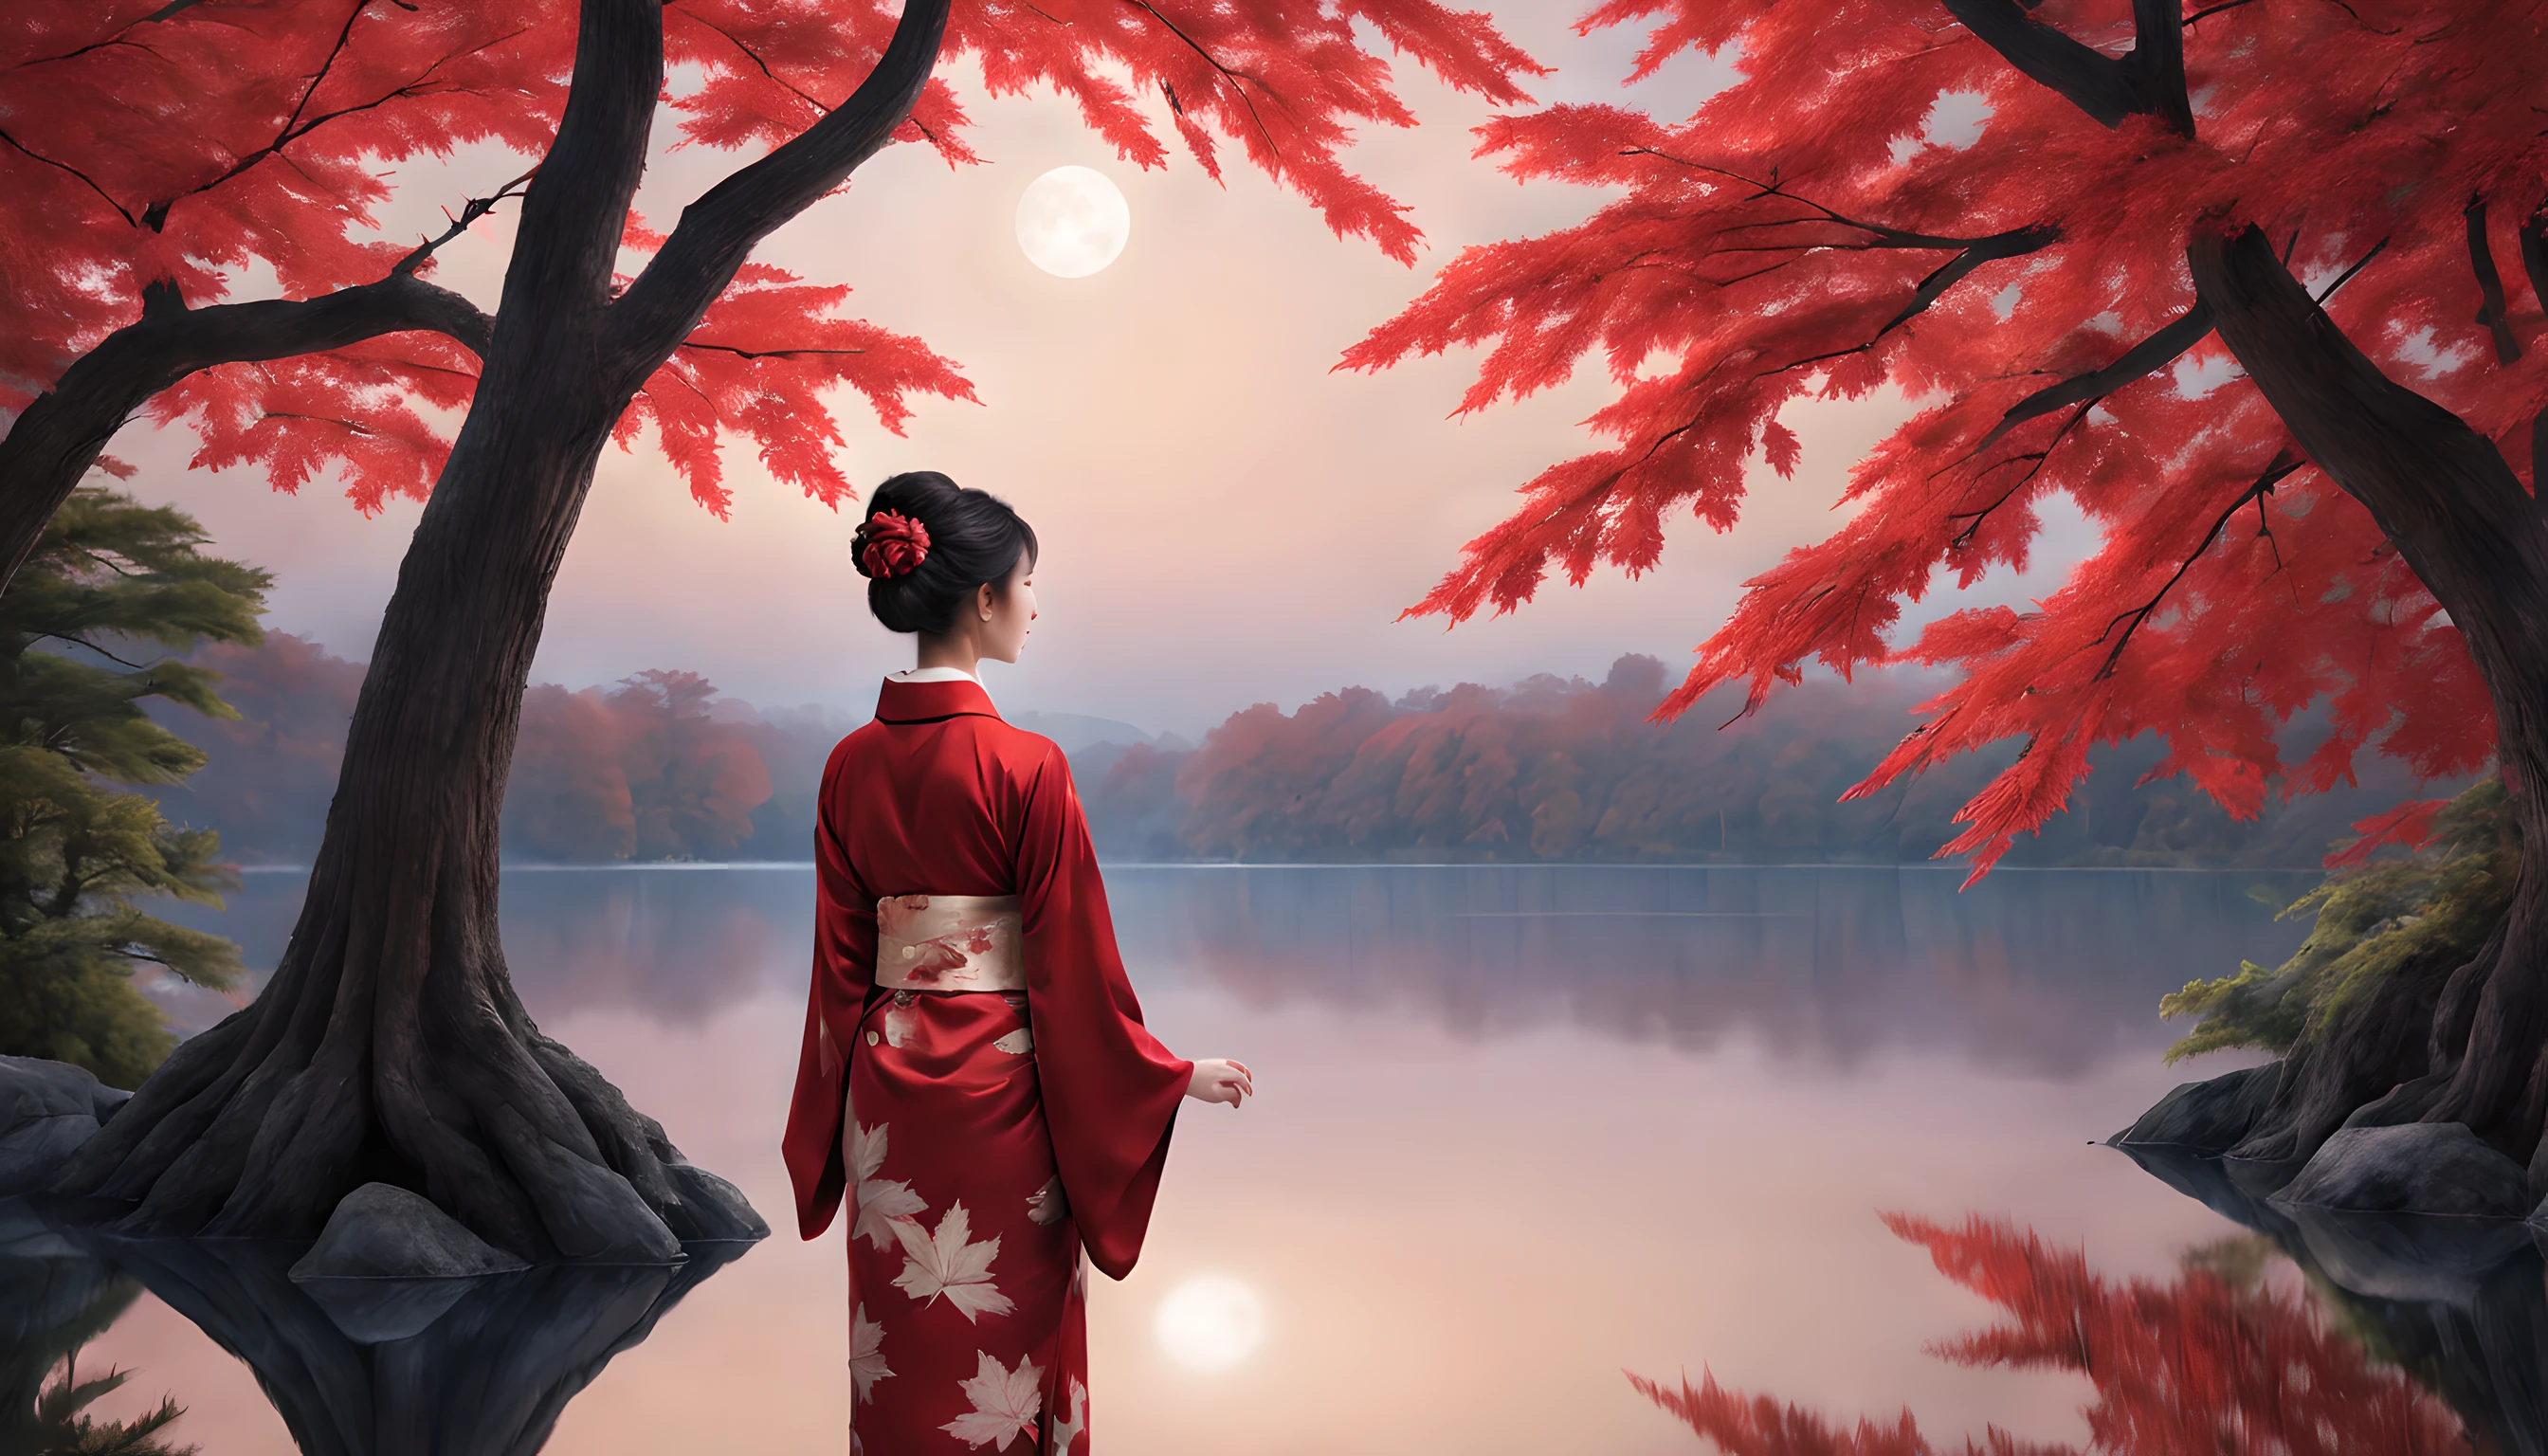 "Compose a captivating nocturnal scene featuring a tranquil pond enveloped by the fiery hues of maple leaf autumn foliage. The composition should emphasize the prominence of the maple leaves and the majestic maple tree that stands nearby.

In the foreground, a Japanese woman in her 40s stands gracefully, draped in a vibrant red kimono. The kimono accentuates her elegance, and her beauty radiates beneath the moonlight. She is a vision of timeless allure, capturing the essence of the season.

The woman gazes upon the shimmering pond, where the reflection of the maple leaves dances upon the water's surface. Her expression is one of serene contemplation, as she immerses herself in the tranquil beauty of the night.

The background showcases the magnificent maple tree, its branches adorned with resplendent leaves that seem to catch the moonlight. The pond reflects the ethereal scene, adding to the enchantment of the moment.

The overall composition should create a sense of serenity and reverence for nature's beauty. Ensure that the woman's captivating beauty and the brilliance of the maple leaves take center stage in this mesmerizing autumn tableau."